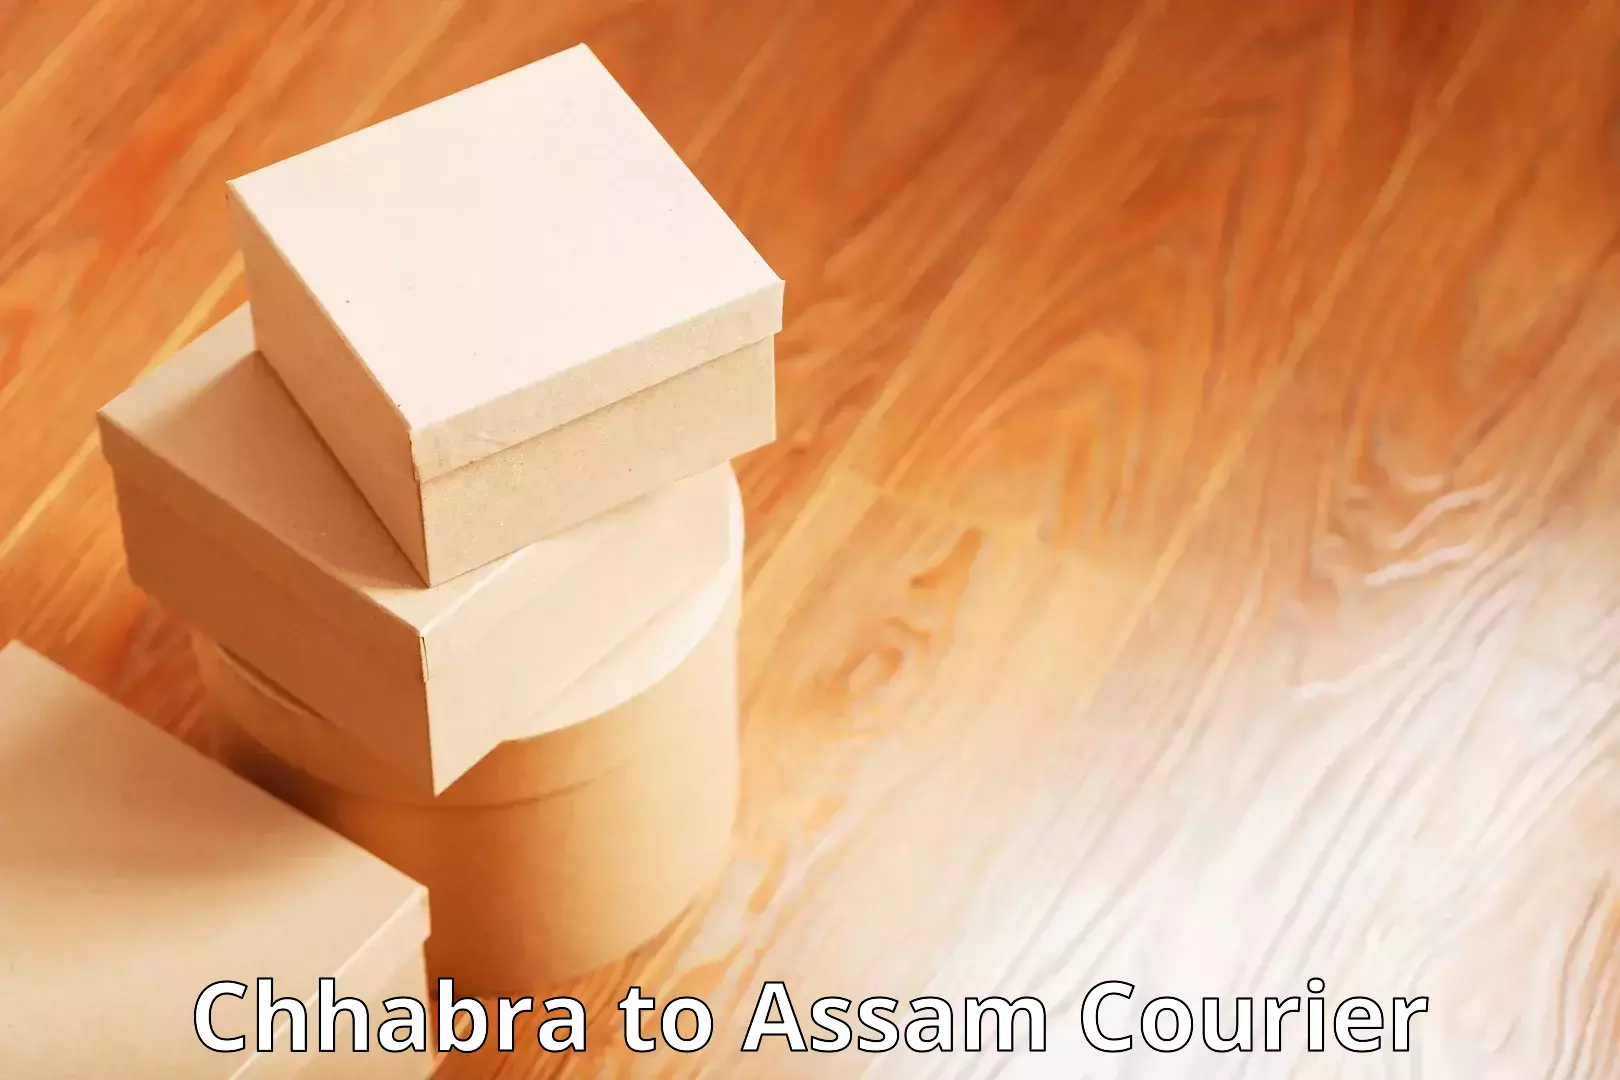 Efficient package consolidation Chhabra to Assam